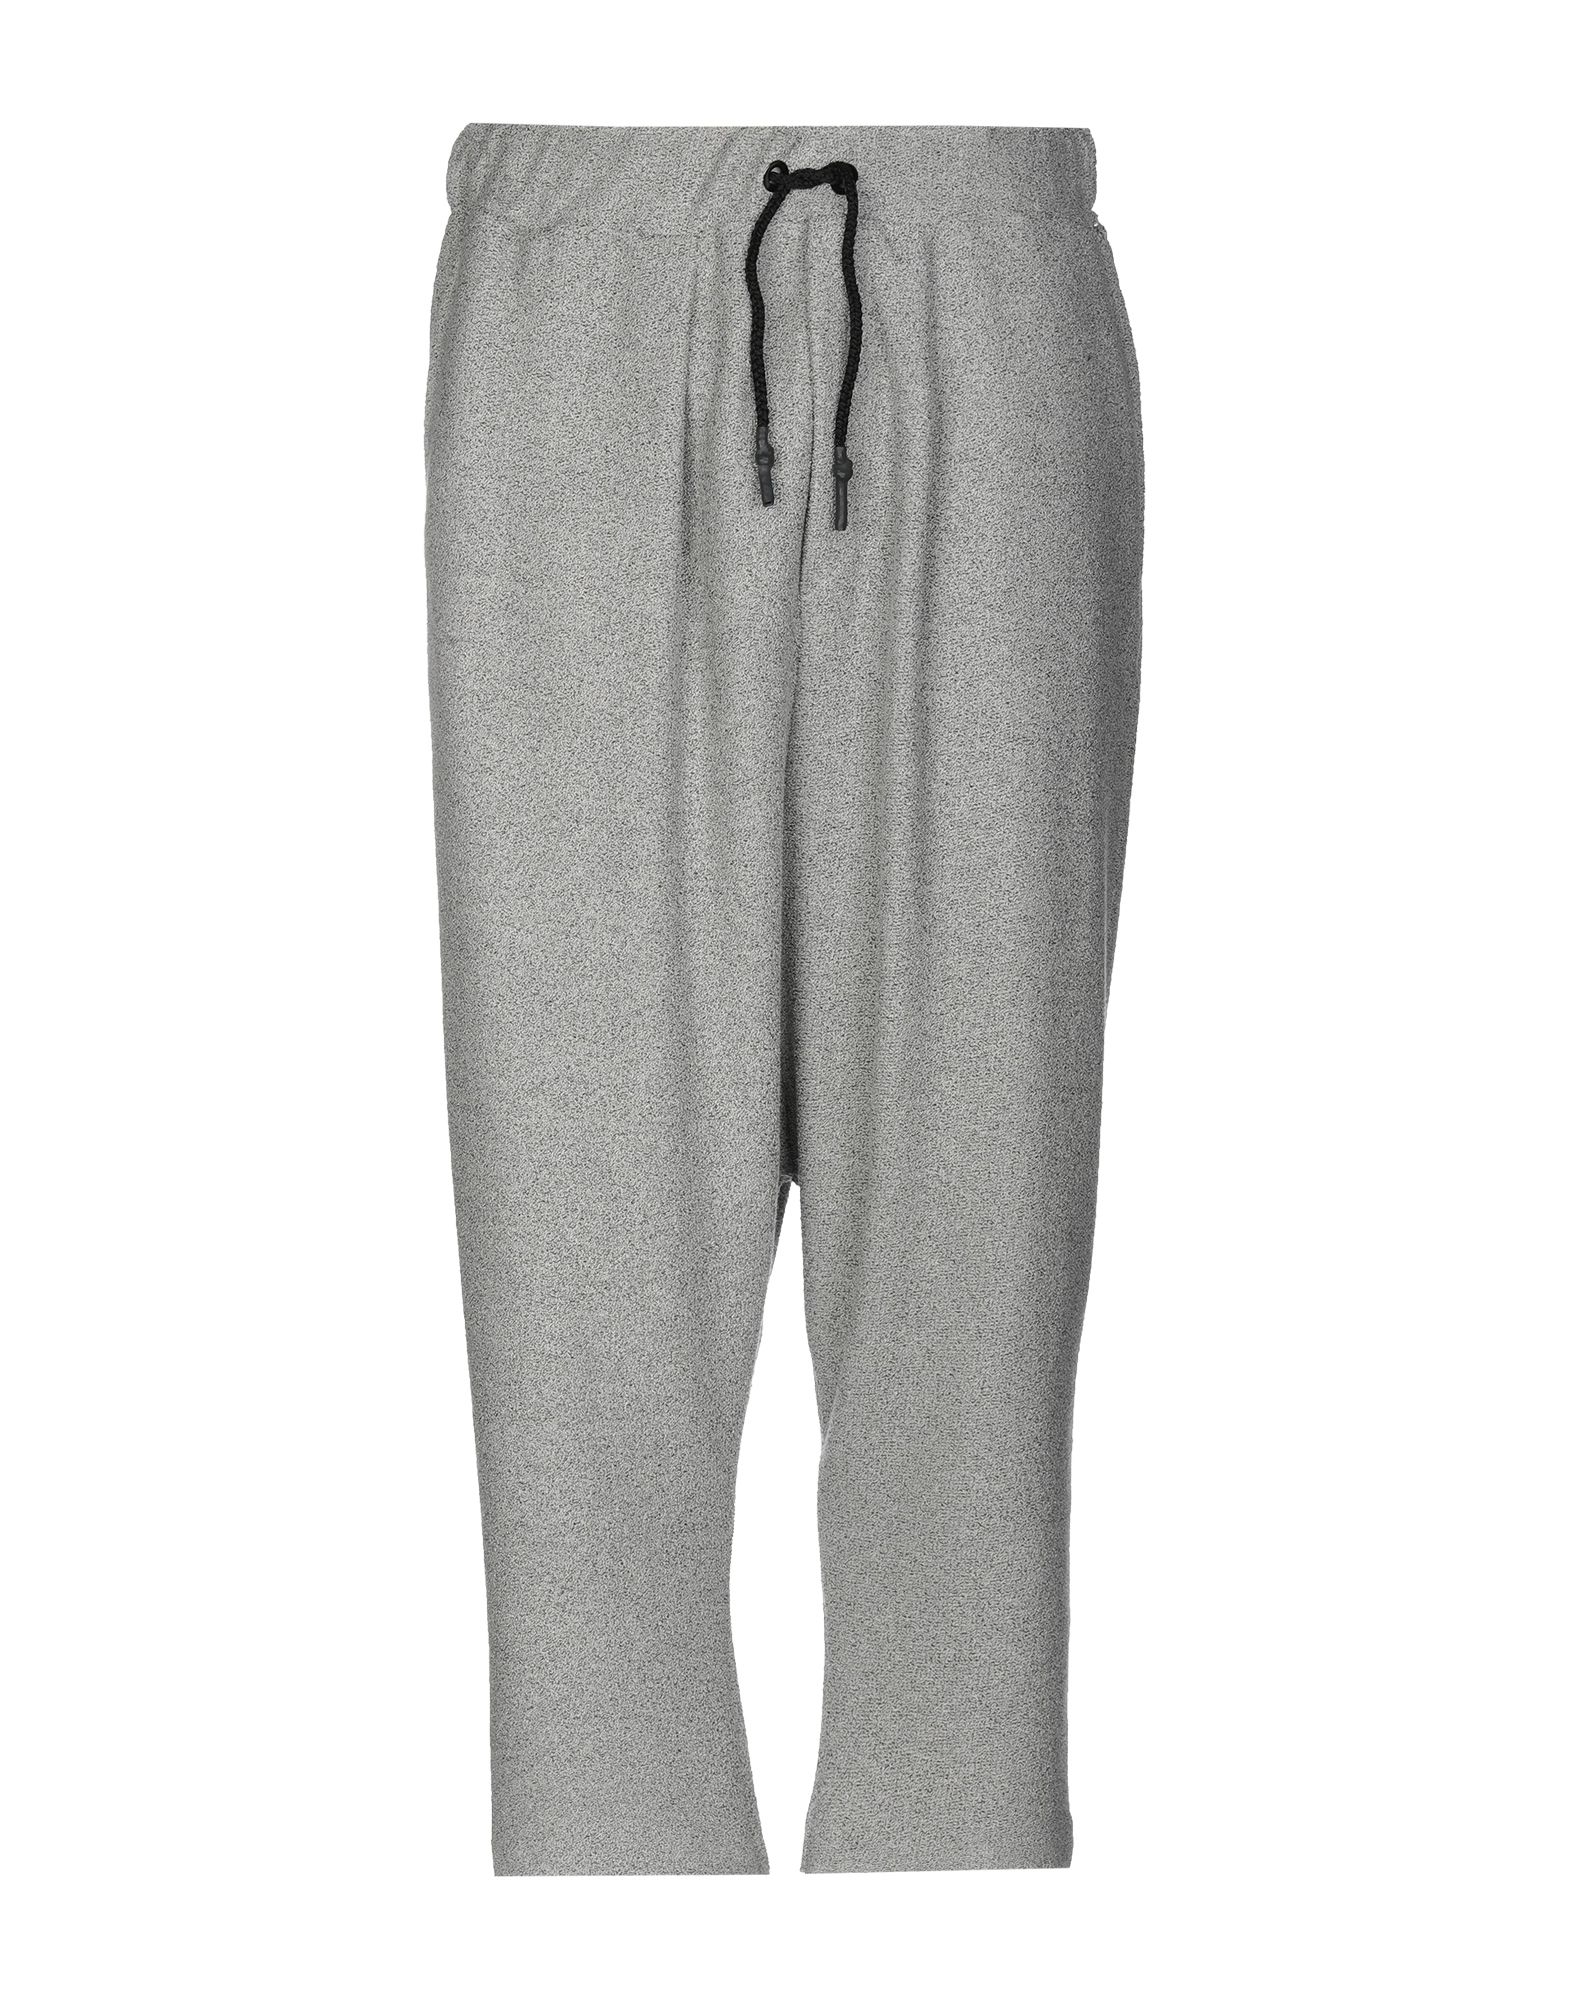 Madd Cropped Pants In Light Grey